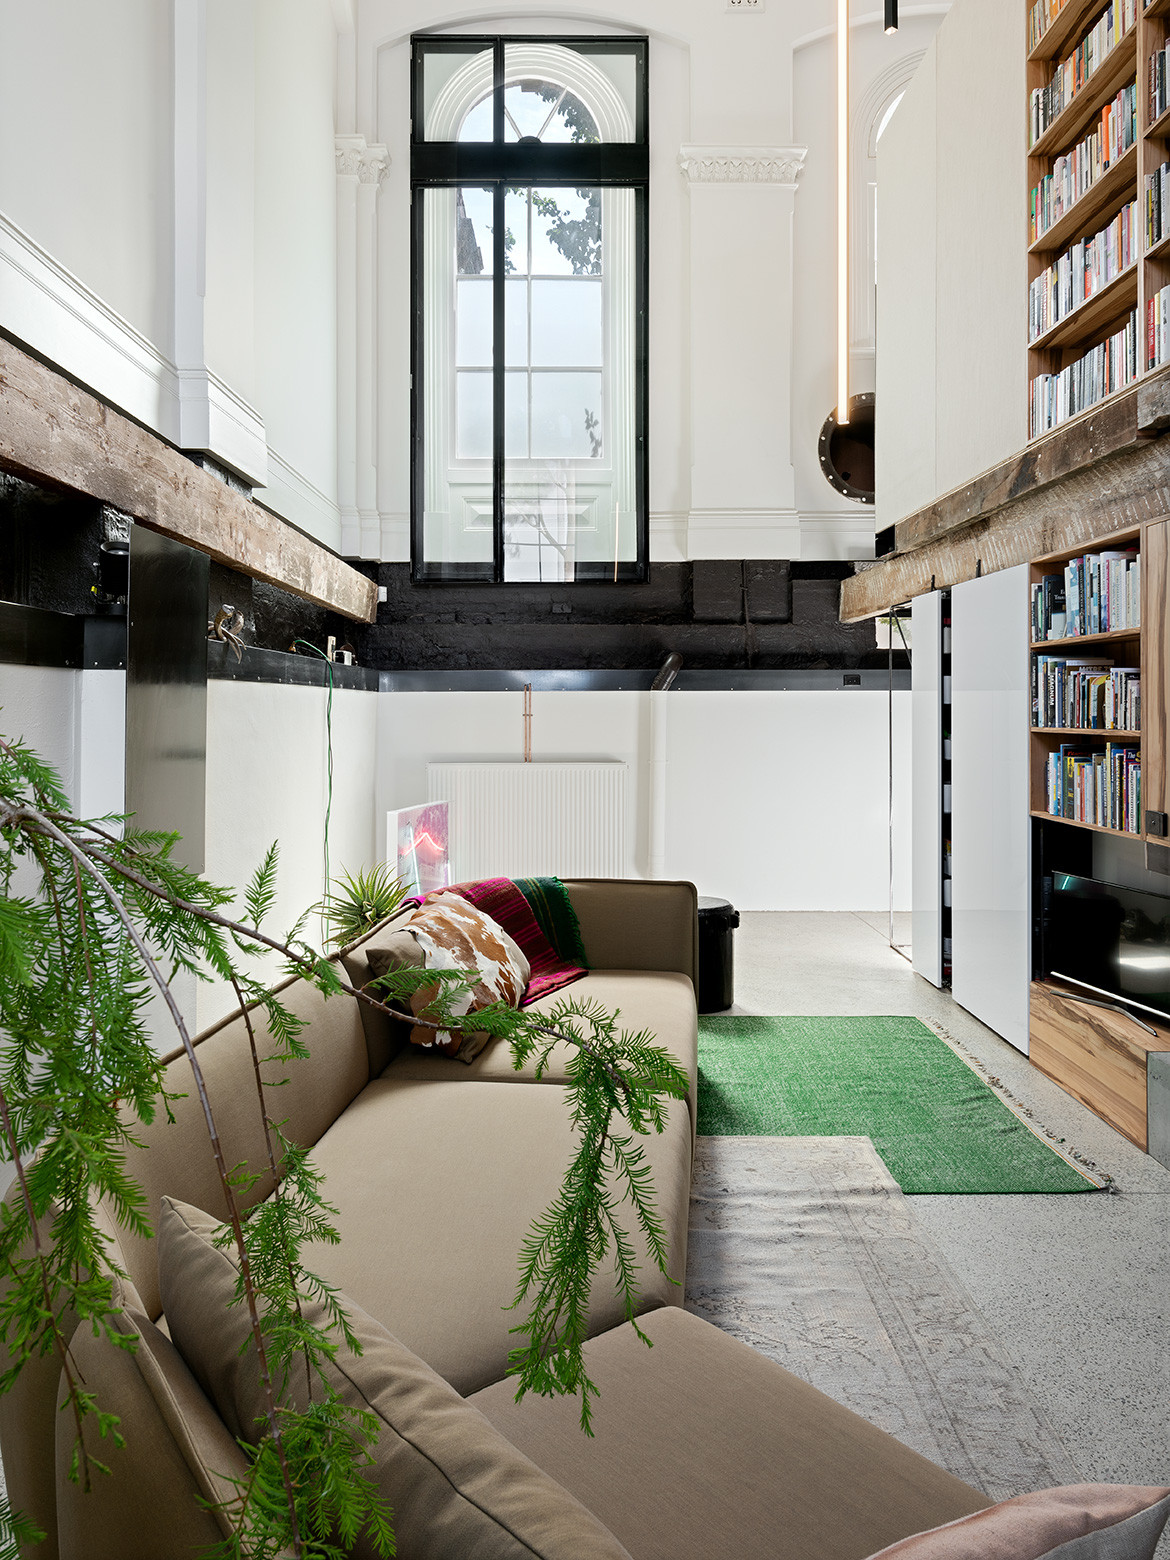 Classical Gas (Melbourne) by Multiplicity cc Emma Cross | Habitus House of the Year 2019